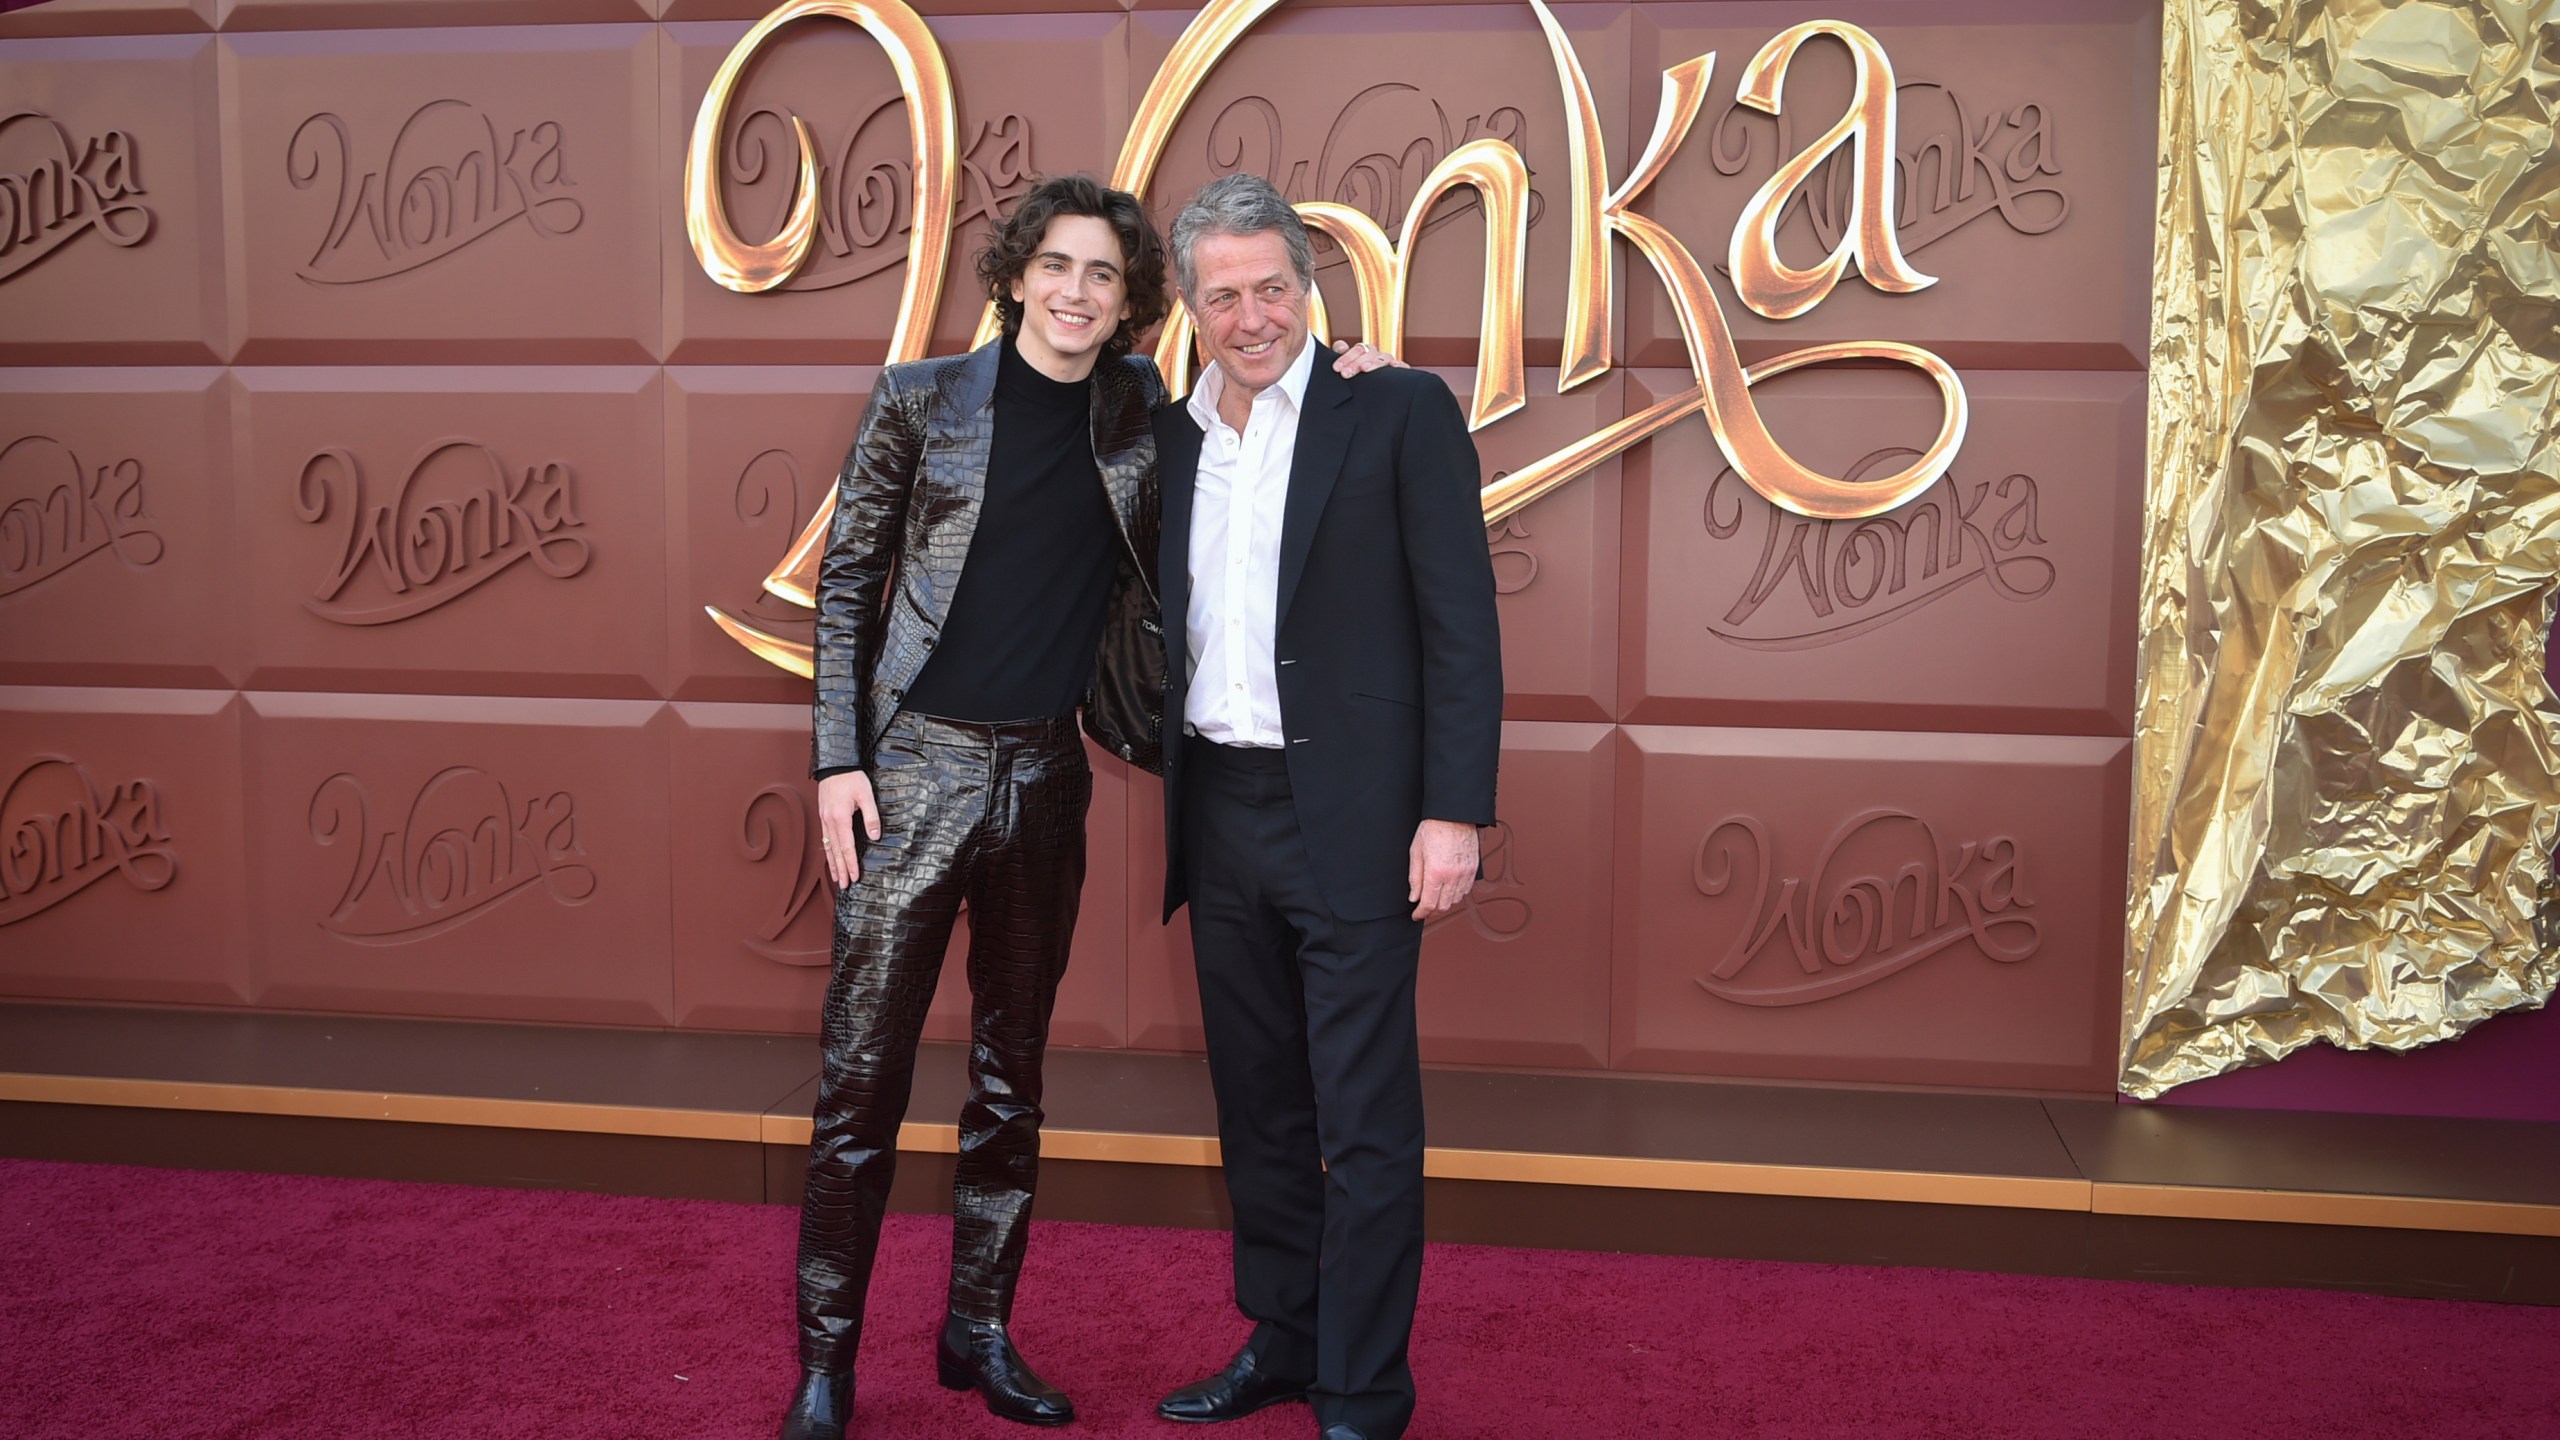 Timothee Chalamet, left, and Hugh Grant arrive at the premiere of "Wonka" on Sunday, Dec. 10, 2023, at Regency Village Theatre in Westwood, Calif. (Photo by Richard Shotwell/Invision/AP)